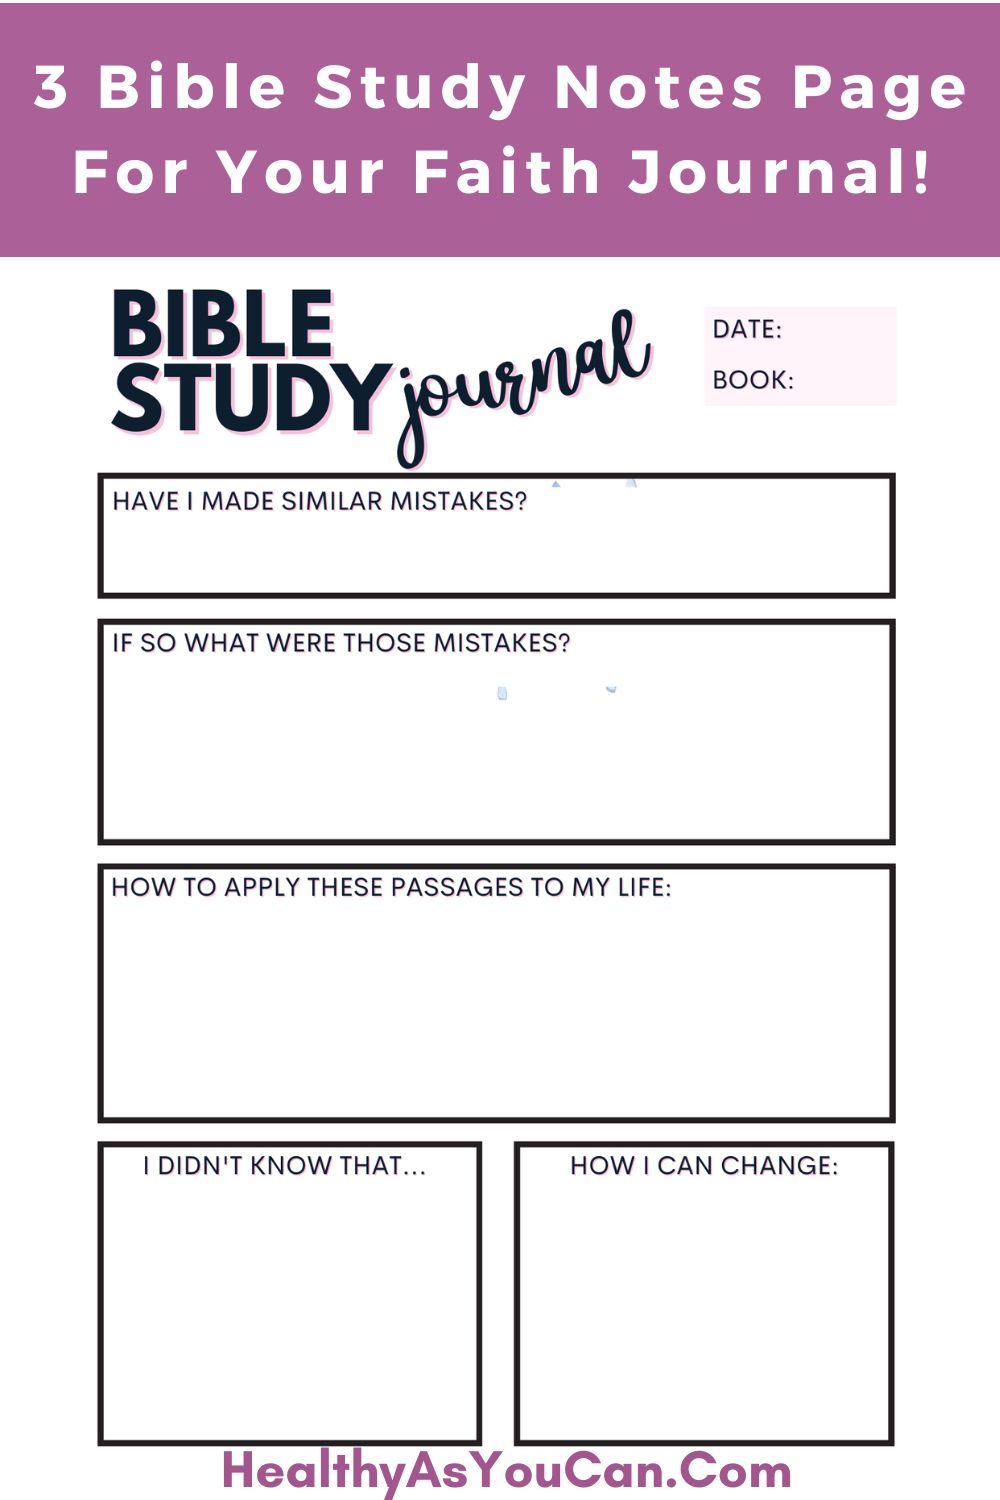 Bible Study Notes Page Journal Ideas purple and white